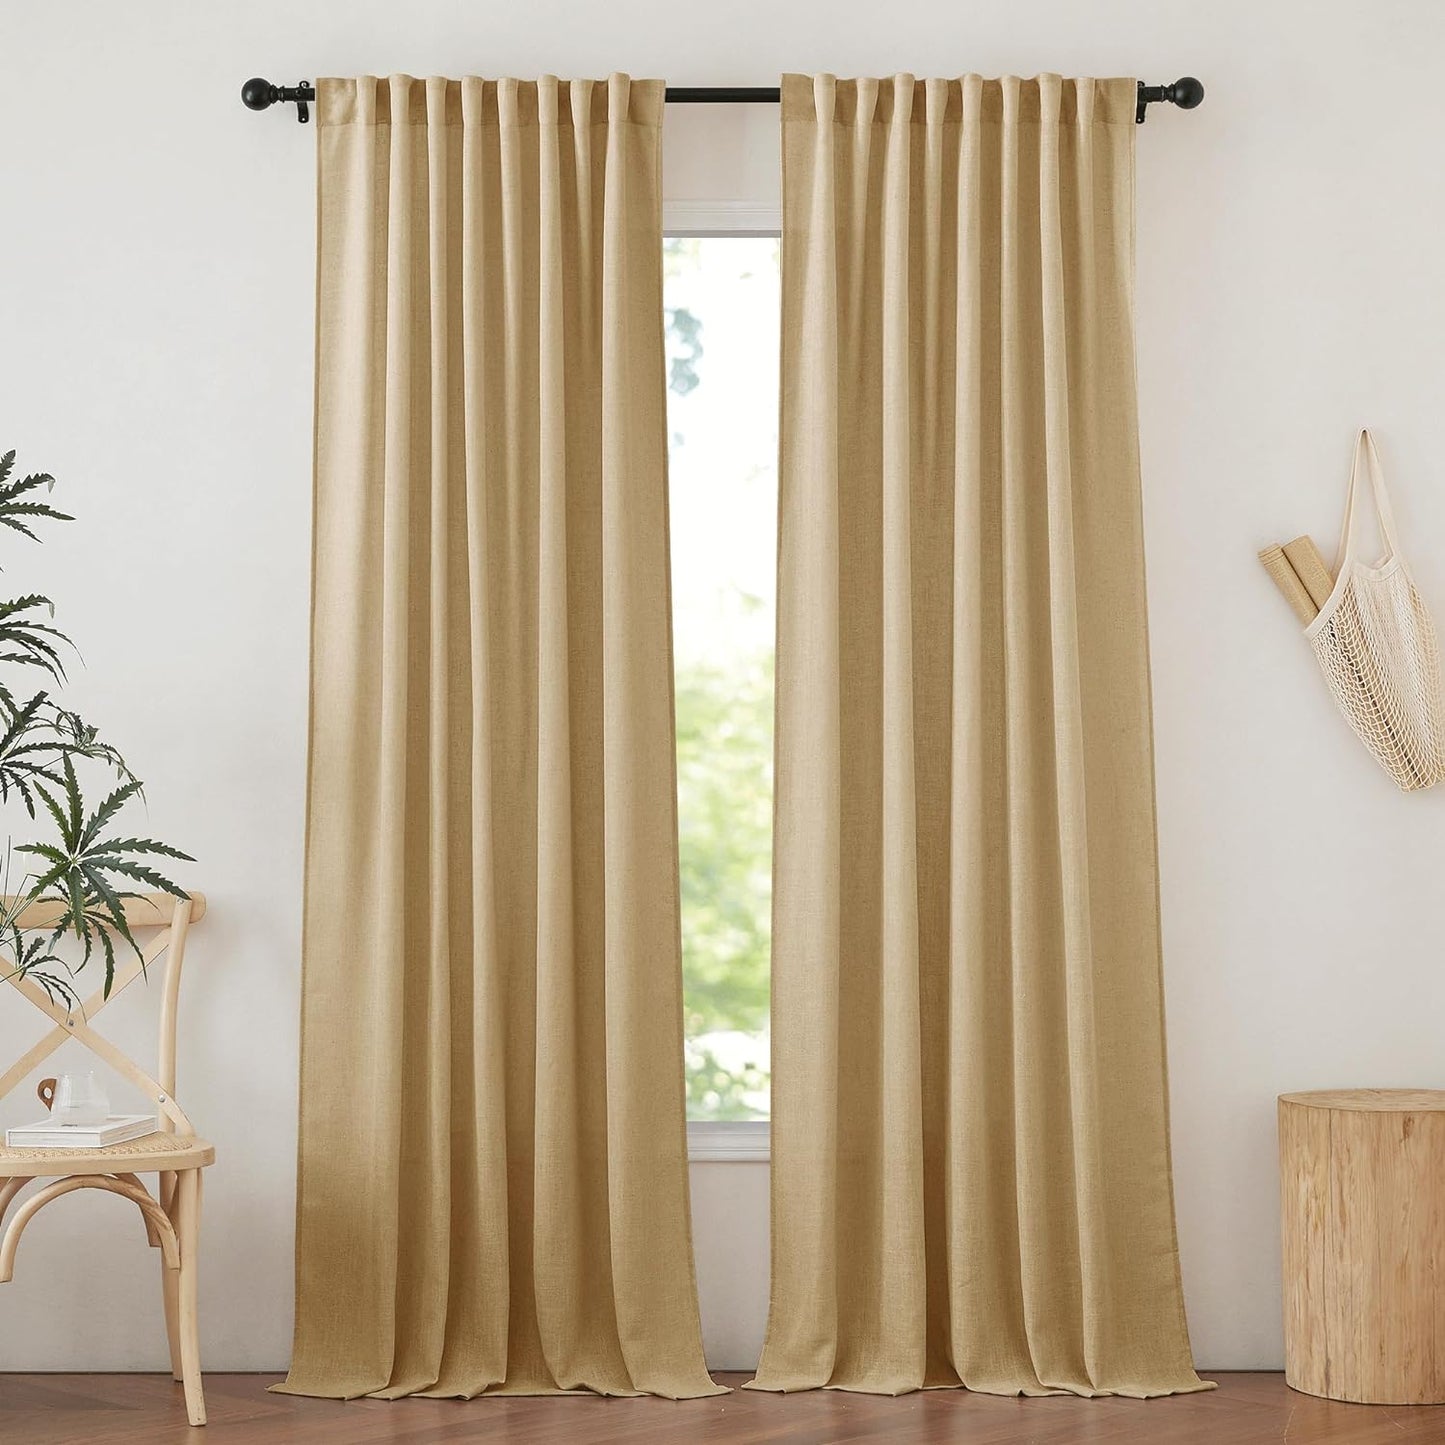 NICETOWN Linen Textured Curtain for Bedroom/Living Room Thermal Insulated Back Tab Linen Look Curtain Drapes Soft Rich Material Light Reducing Drape Panels for Window, 2 Panels, 52 X 84 Inch, Linen  NICETOWN Brown W52 X L84 